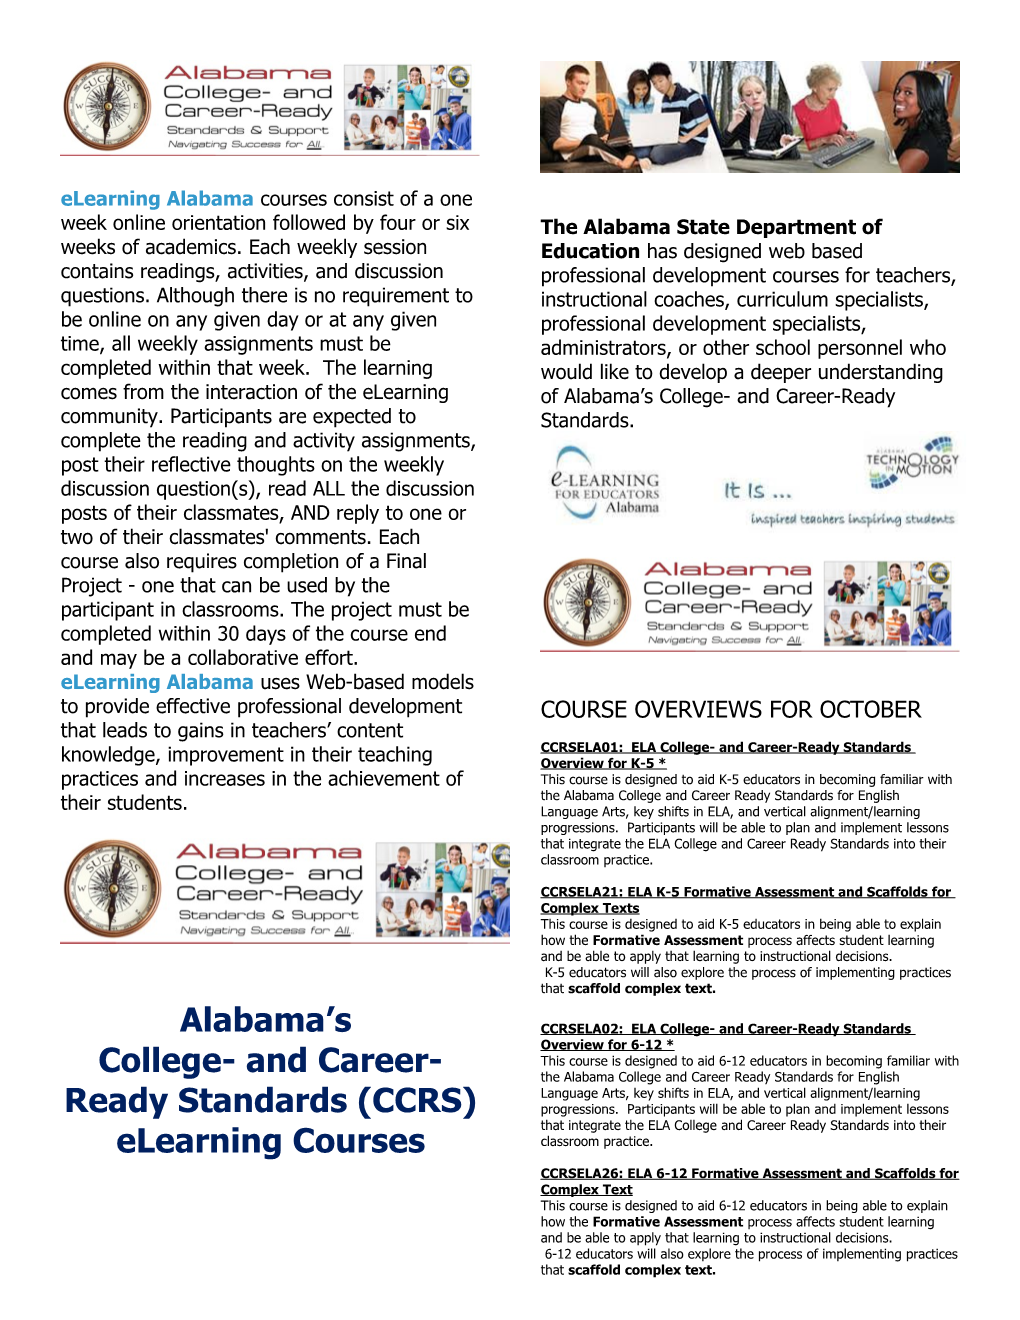 College- and Career-Ready Standards (CCRS) Elearning Courses